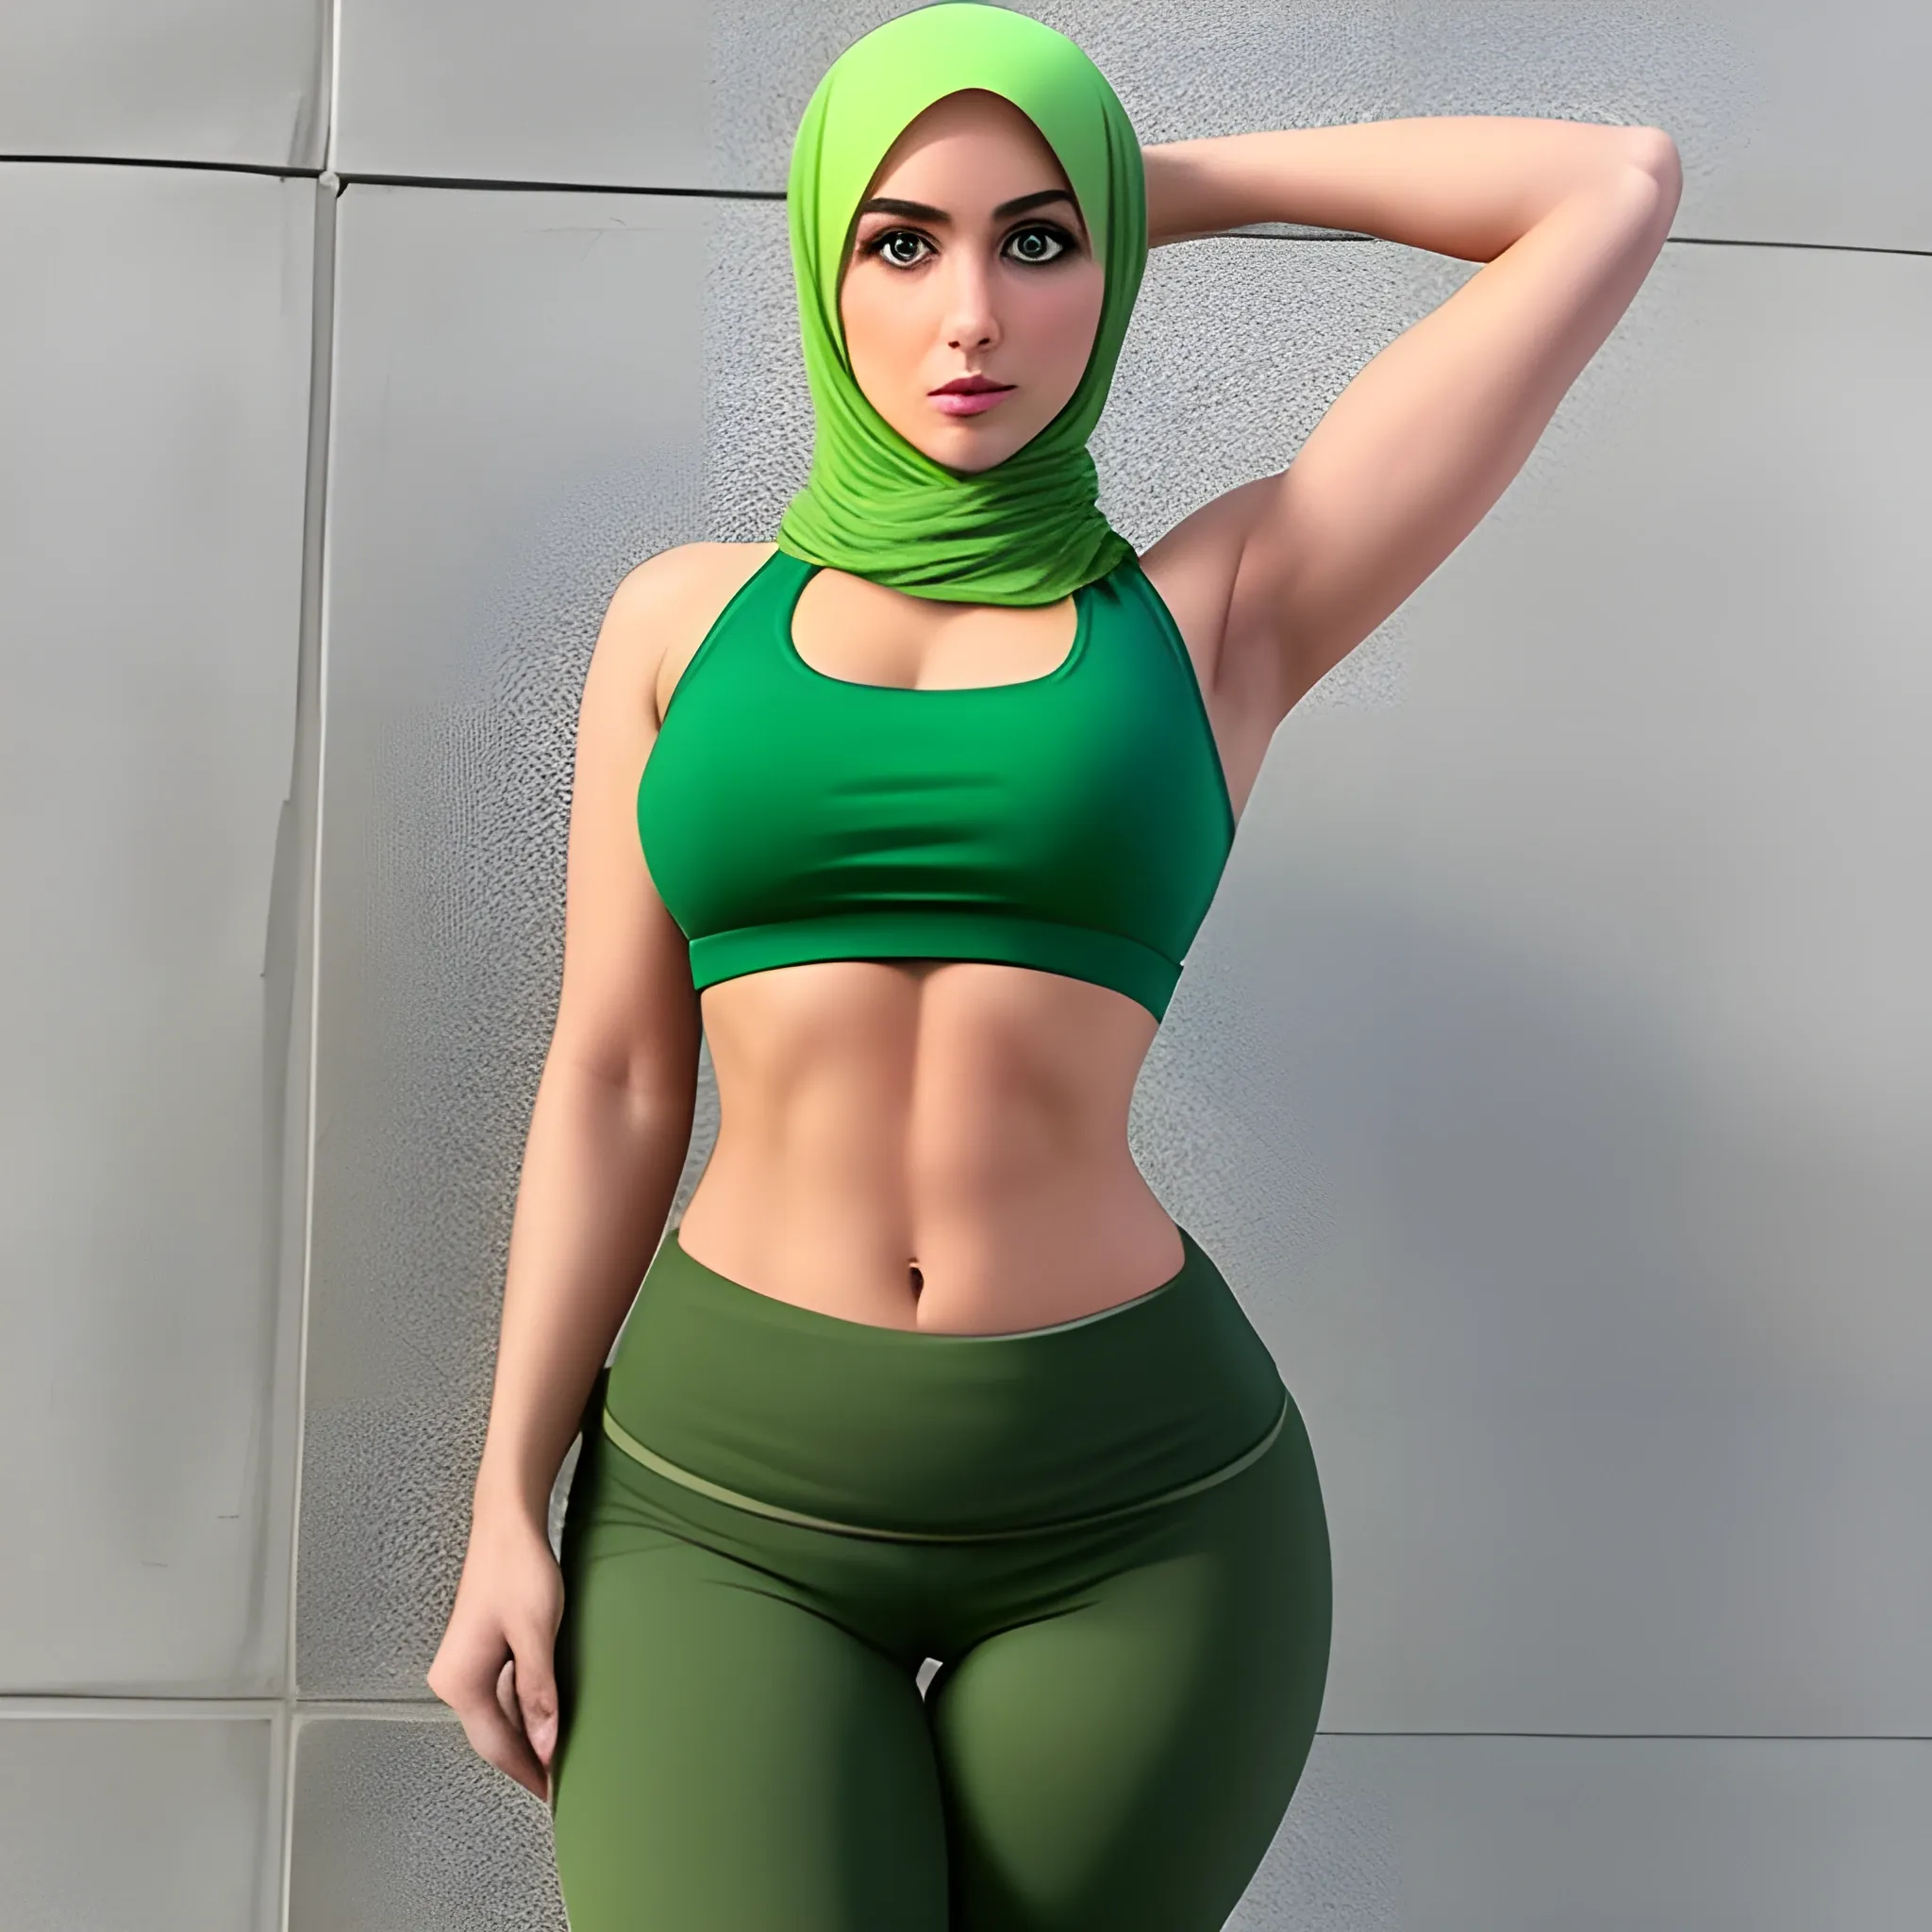 fit hot hijab babe beautiful green eyes side pose masterpiece art with a crop top on with  a curvy waist and soft abs4k award winning yoga pants 